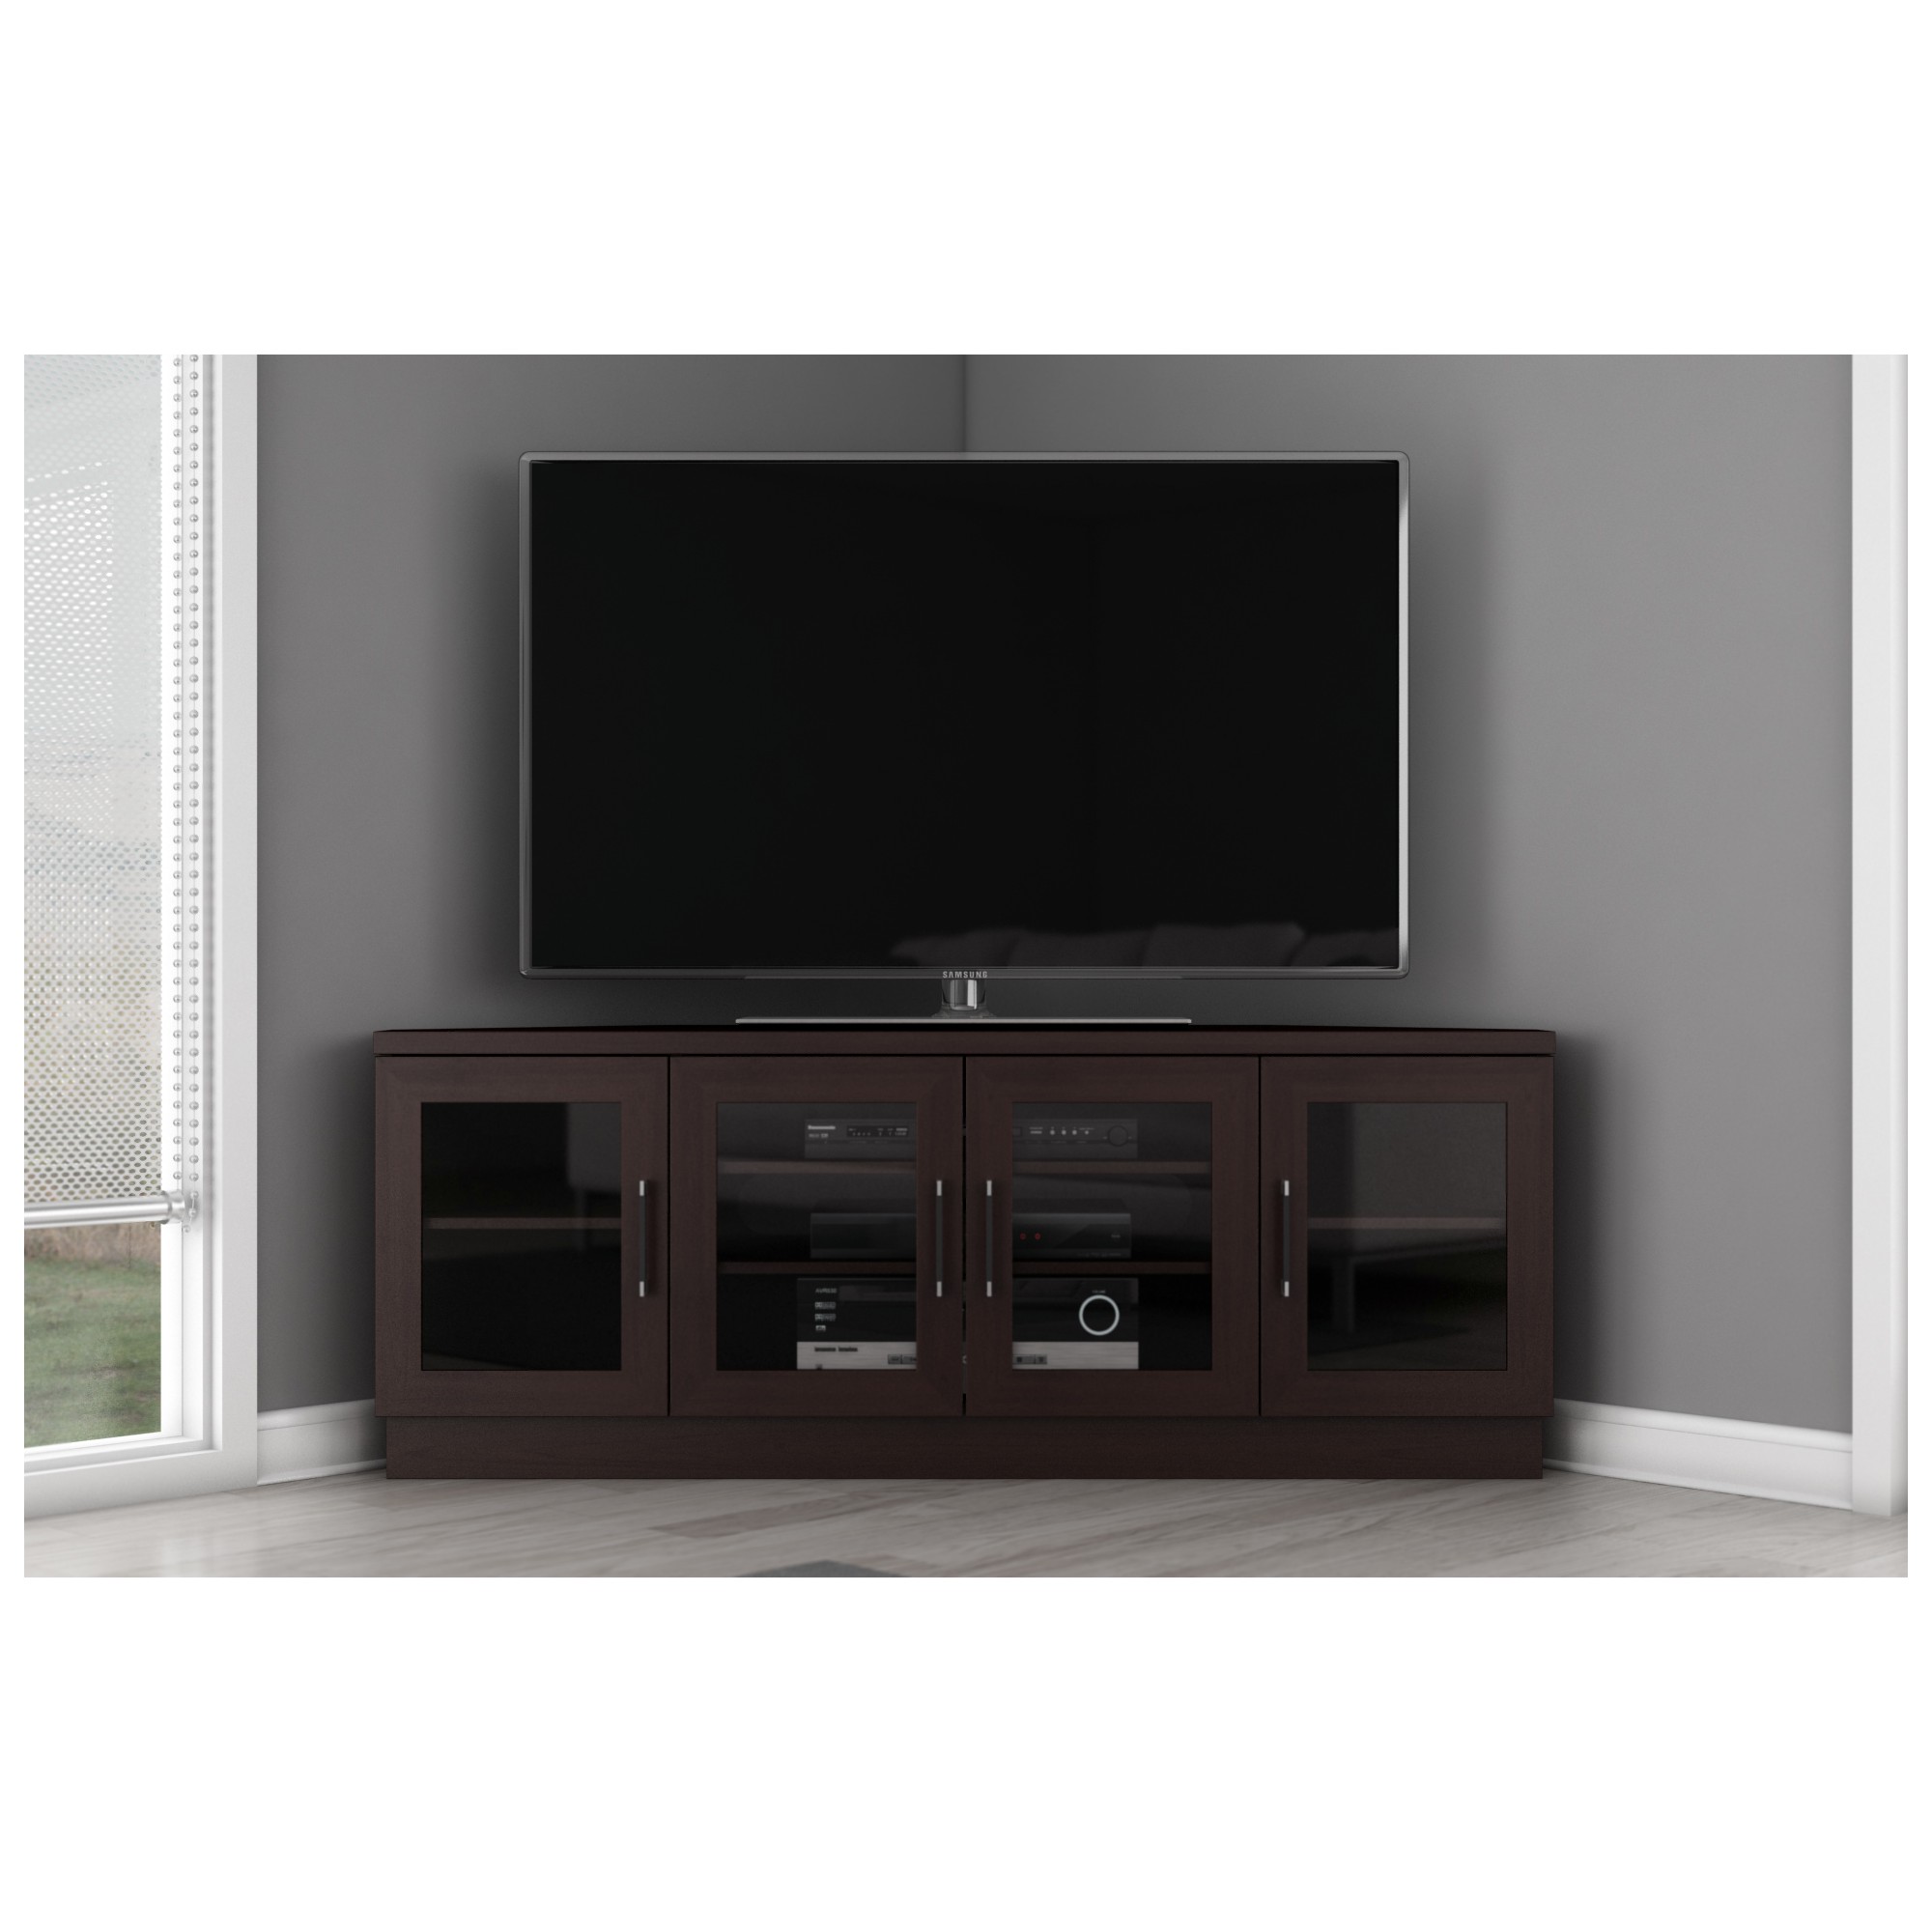 Furnitech FT60CCCW FT60CCCW 60" TV Stand Contemporary ...